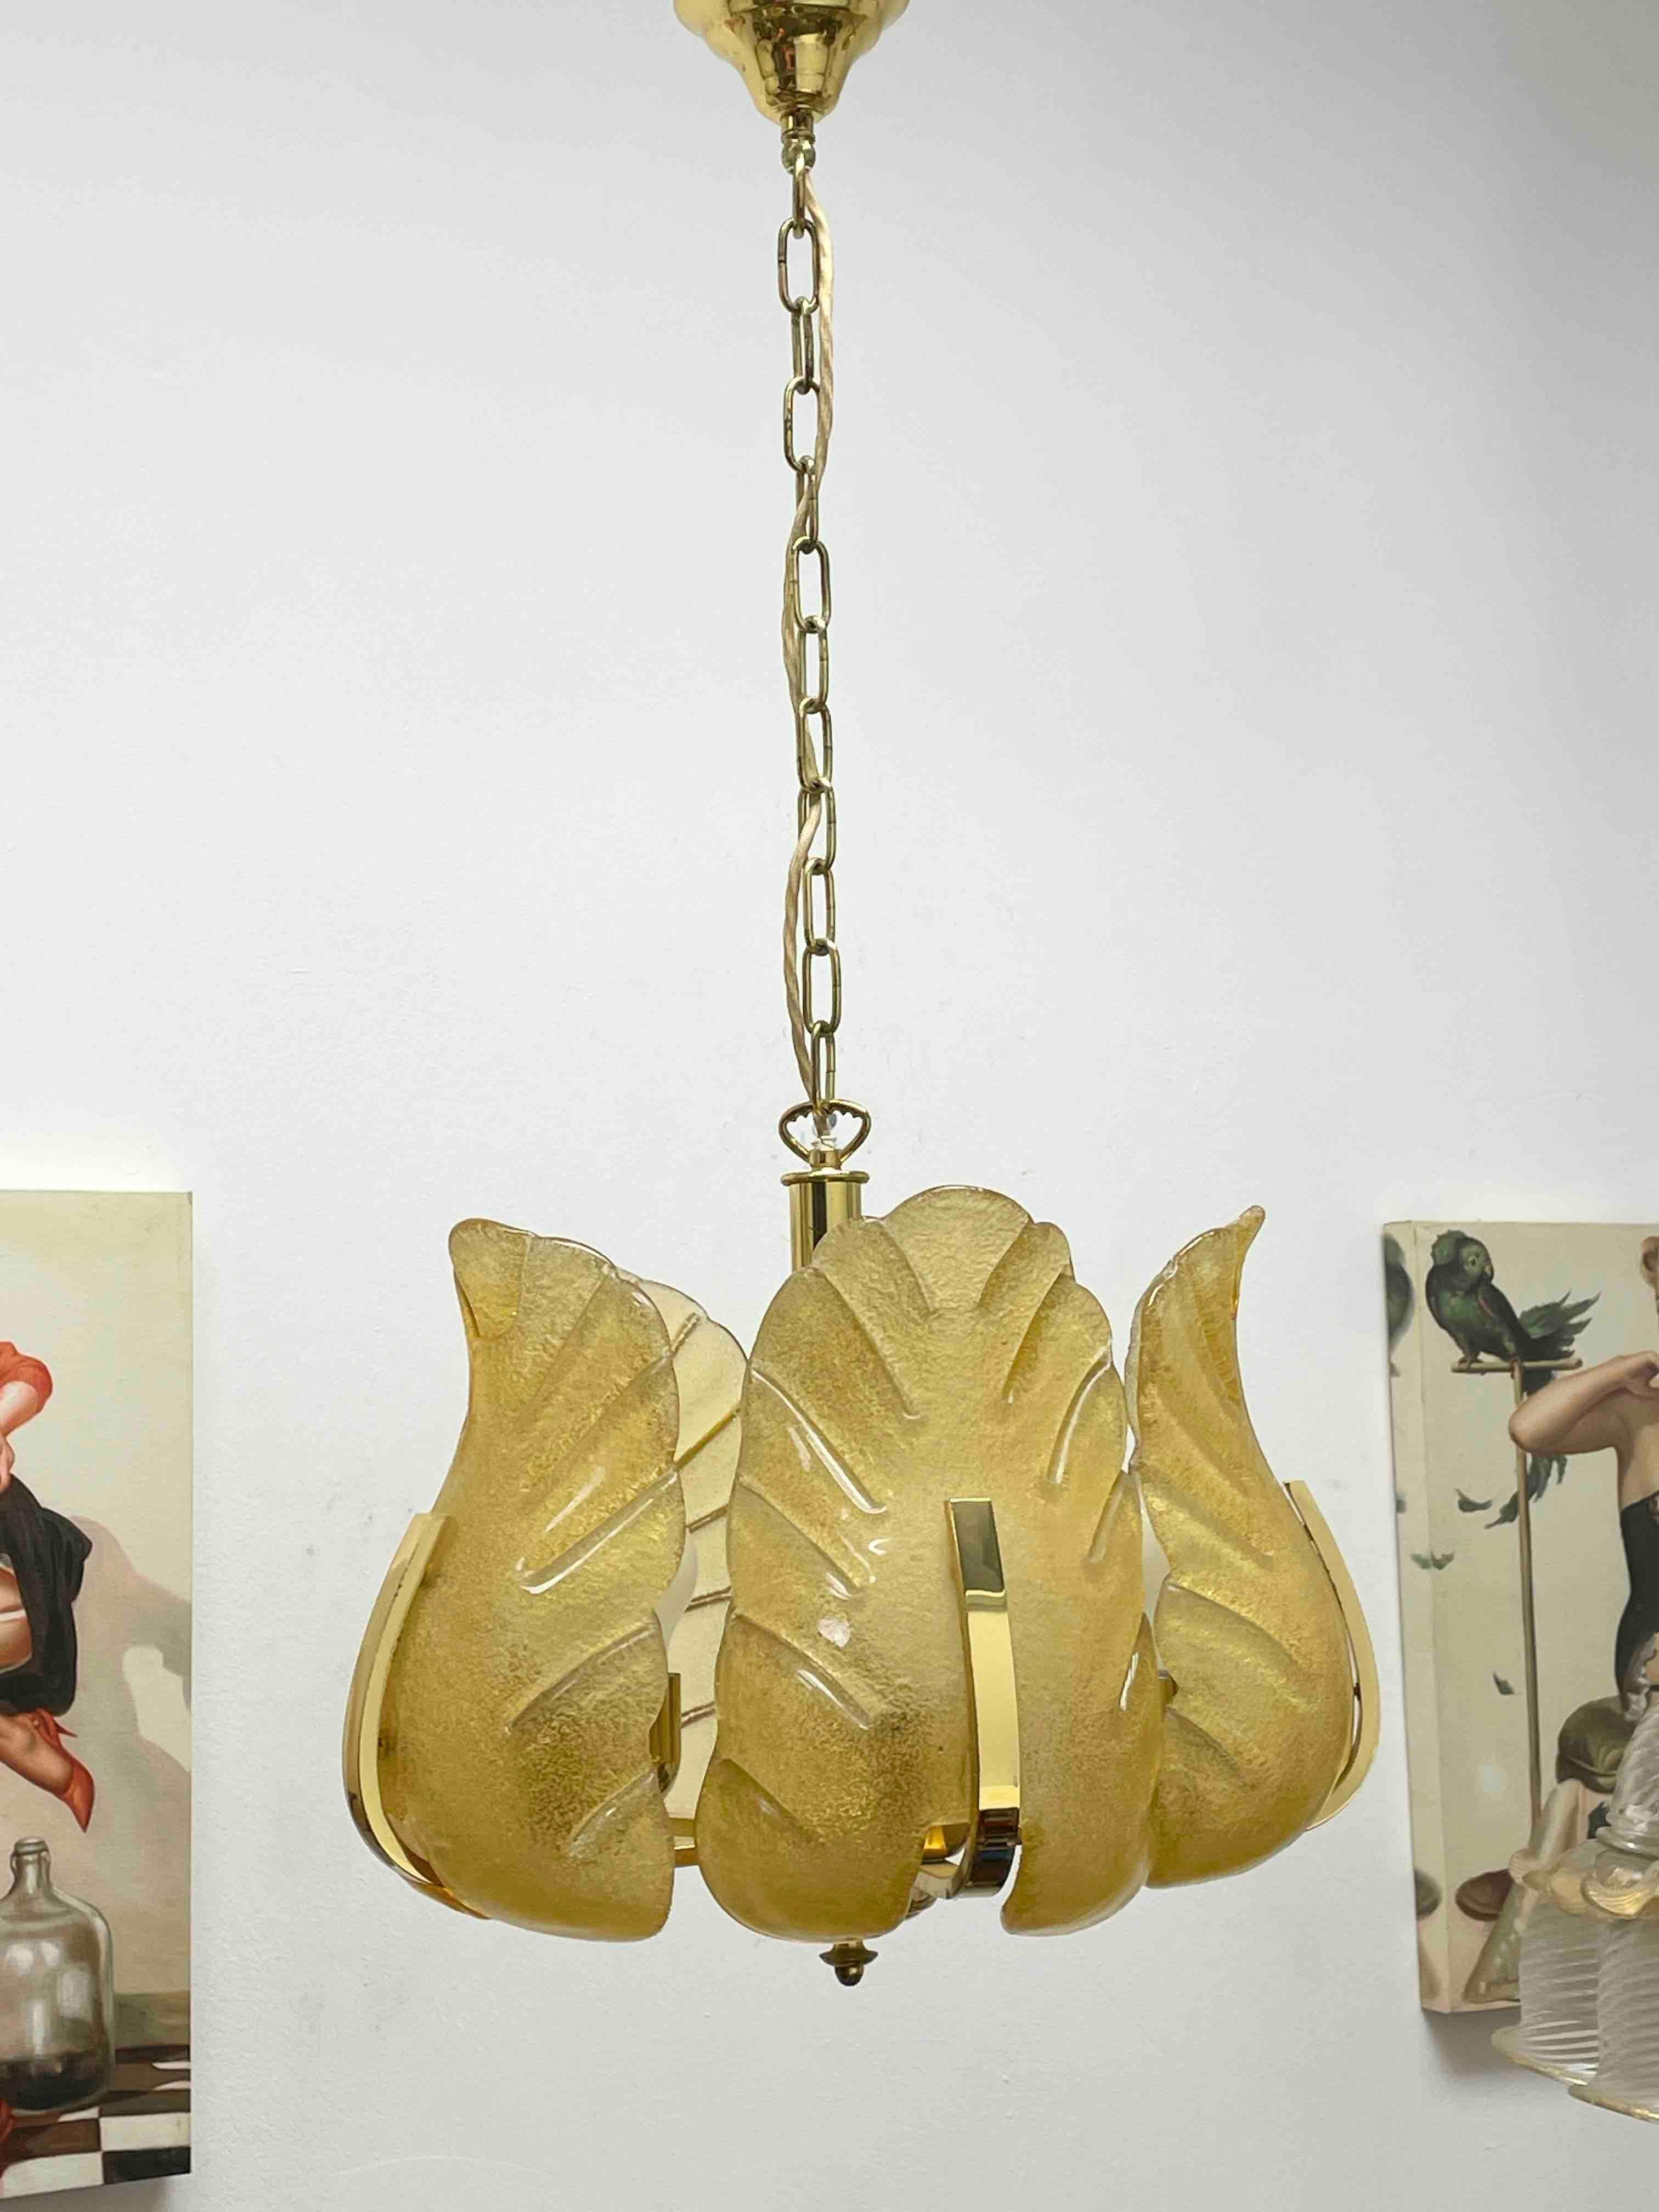 Beautiful chandelier designed by Carl Fagerlund for Orrefors, Sweden. This light fixture is made of metal, brass and lovely elements of glass in the style of leafs. Gorgeous Scandinavian lamp with Murano glass and brass, in very good vintage